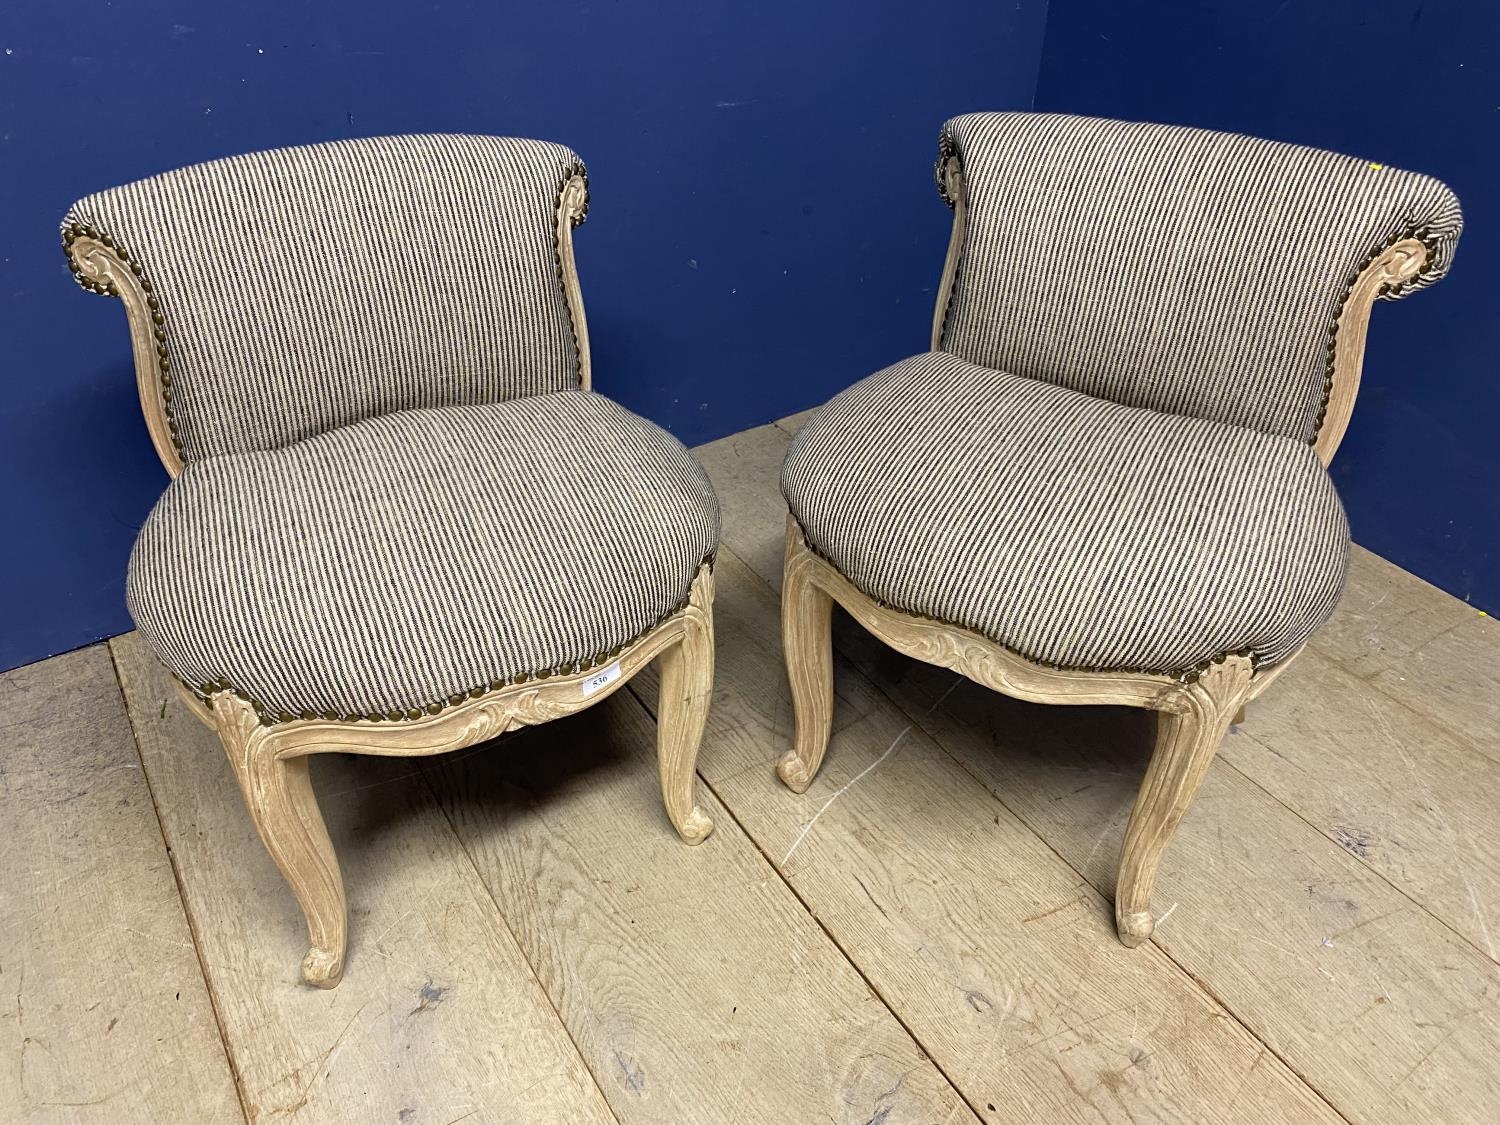 Pair of modern small French style low back chairs, chairs, upholstered in a striped fabric